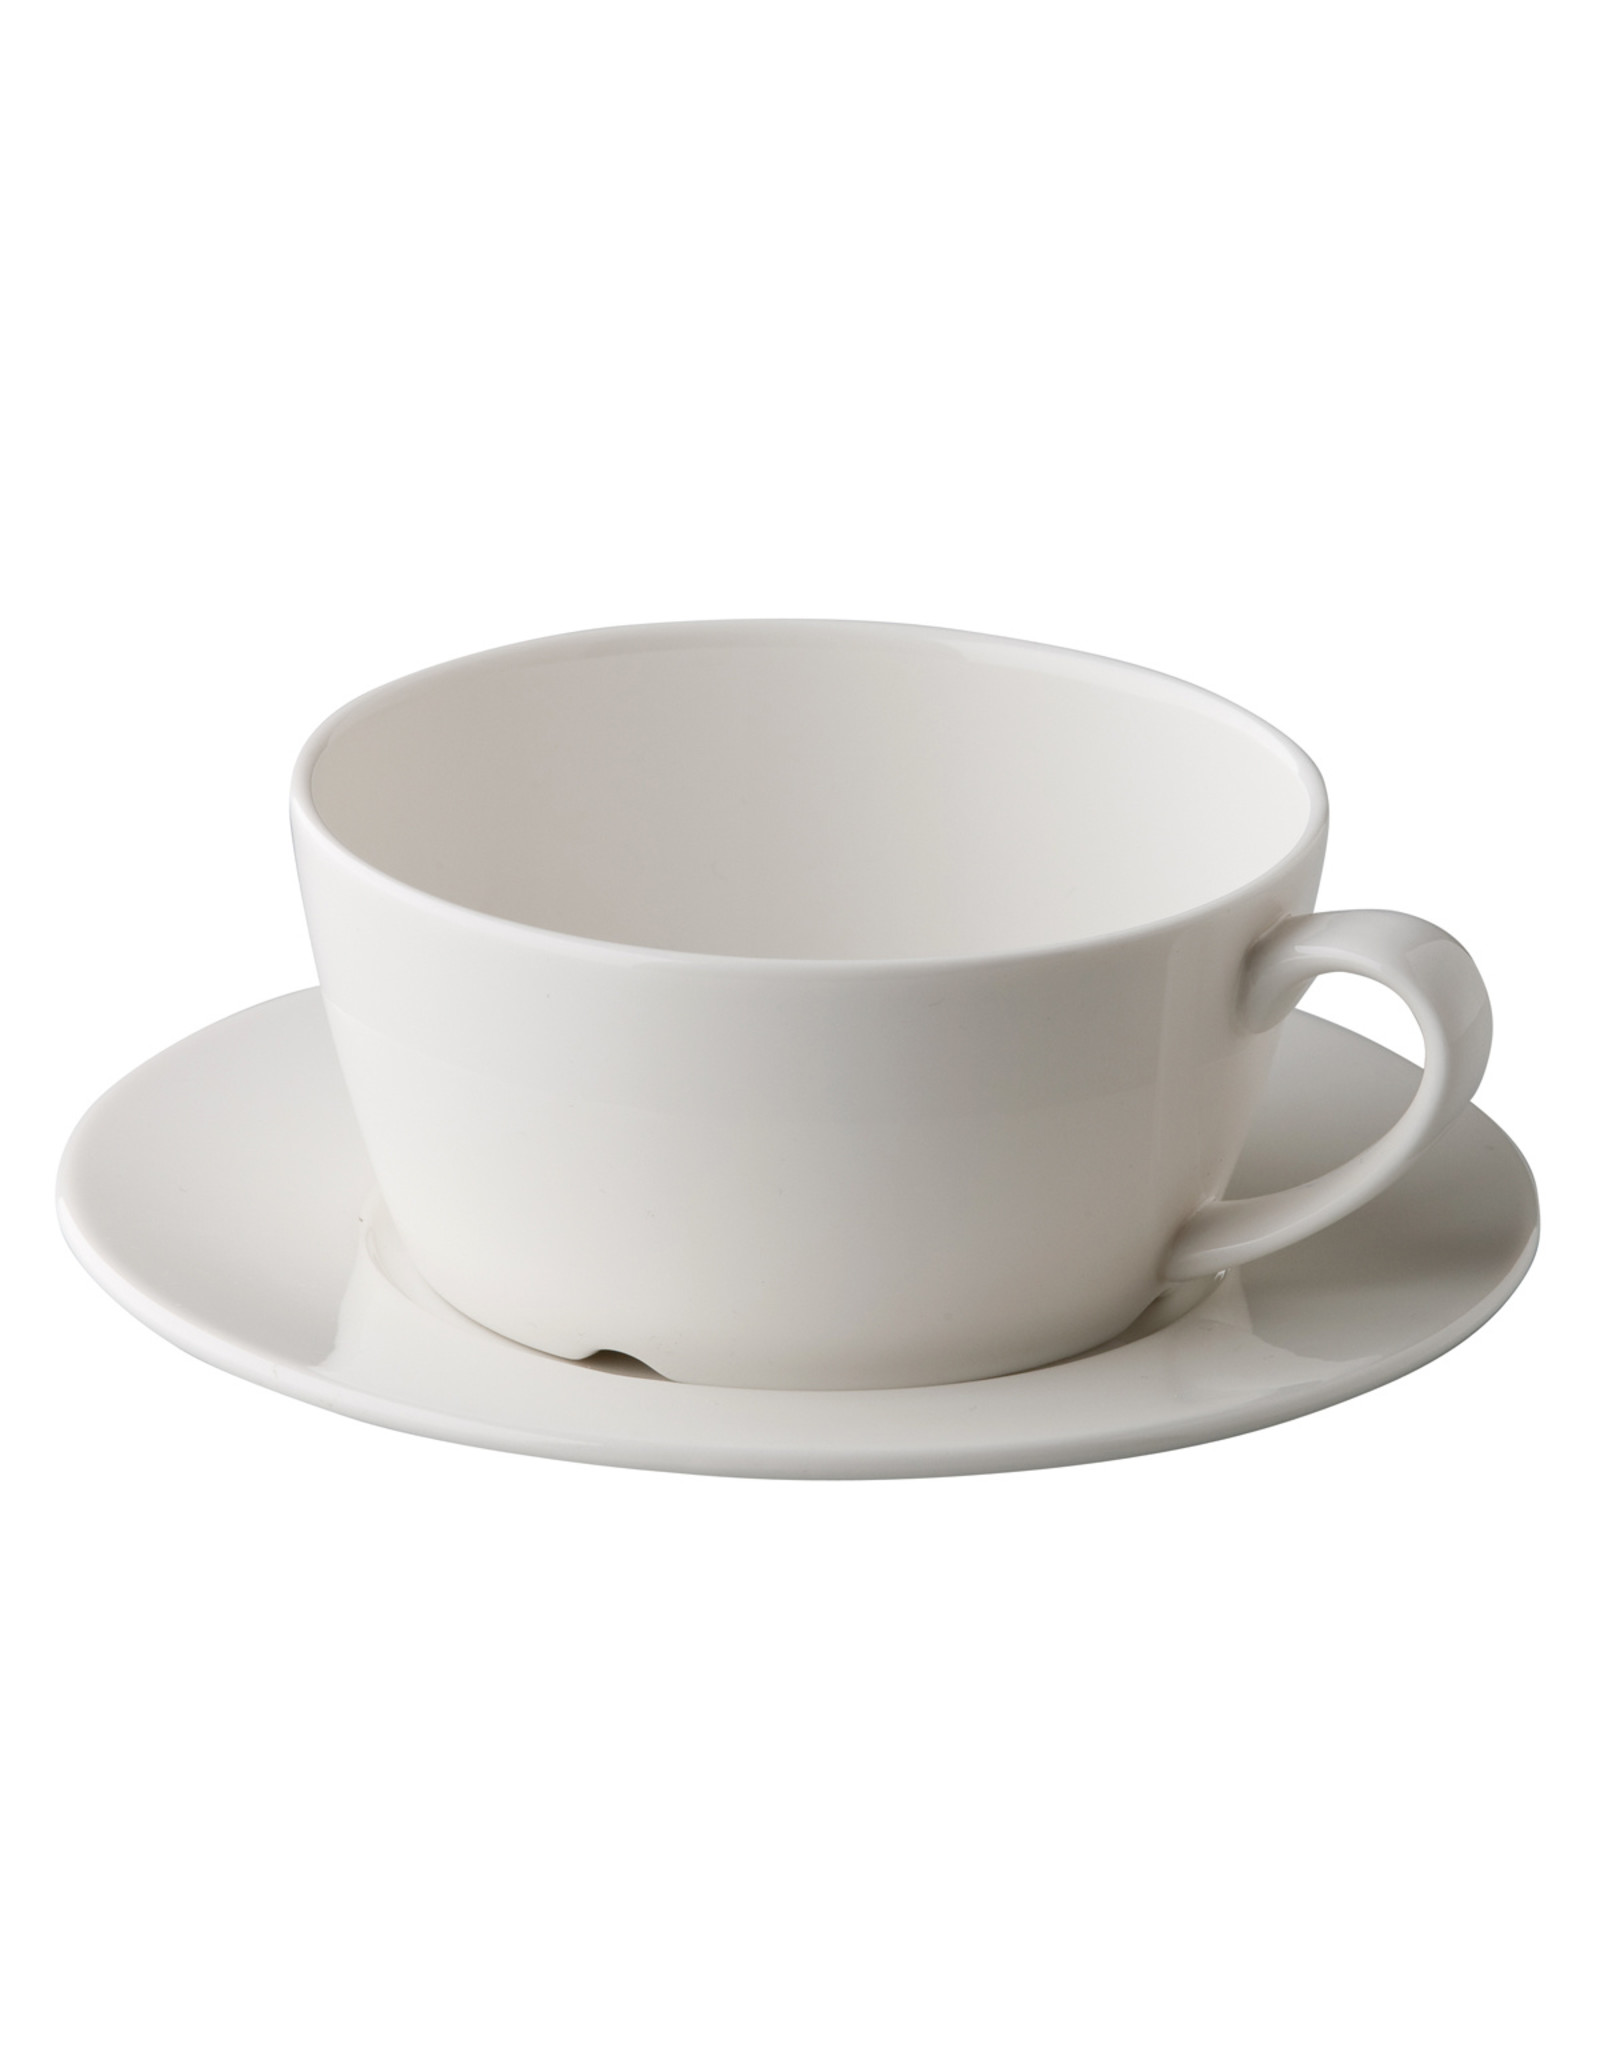 Stylepoint Q Fine China soup bowl with one handle 300 ml